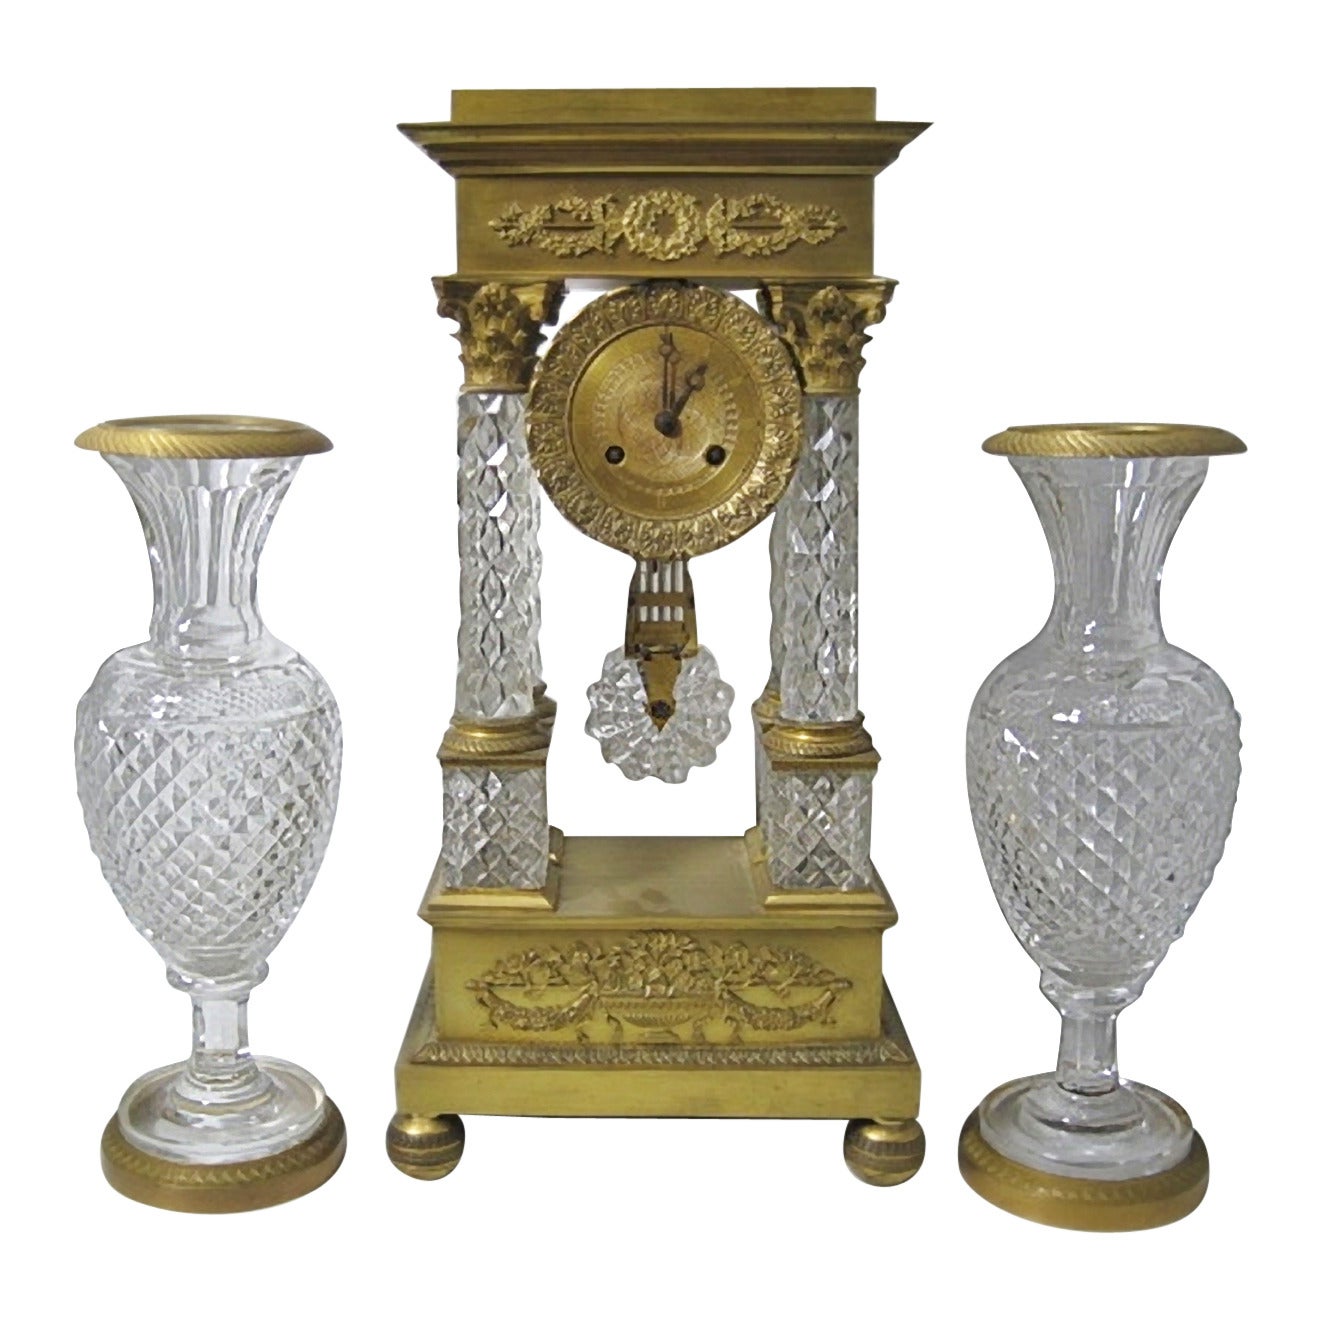 Baccarat Crystal Clock Garniture, French Empire with Gilt Bronze